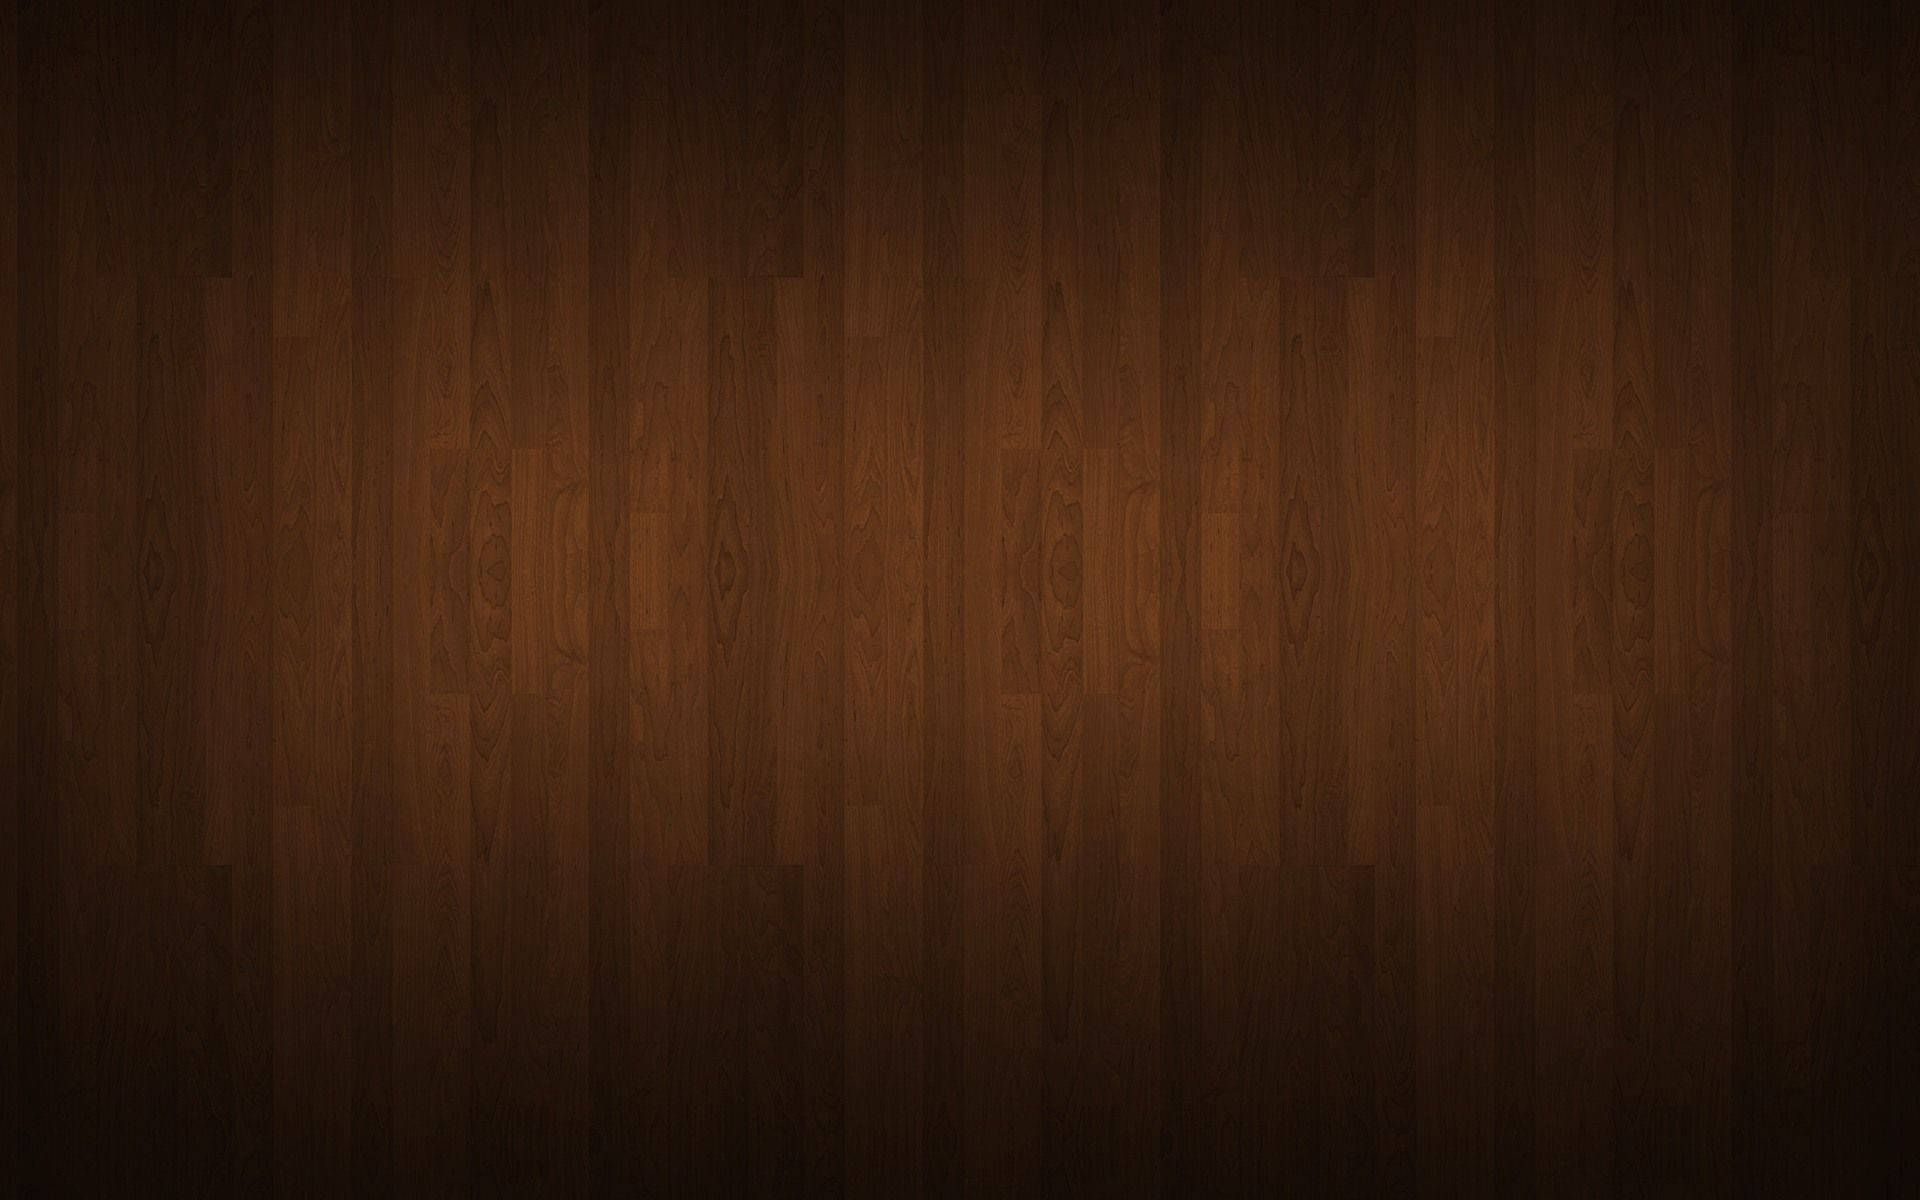 Rustic, Polished Brown Wood Background